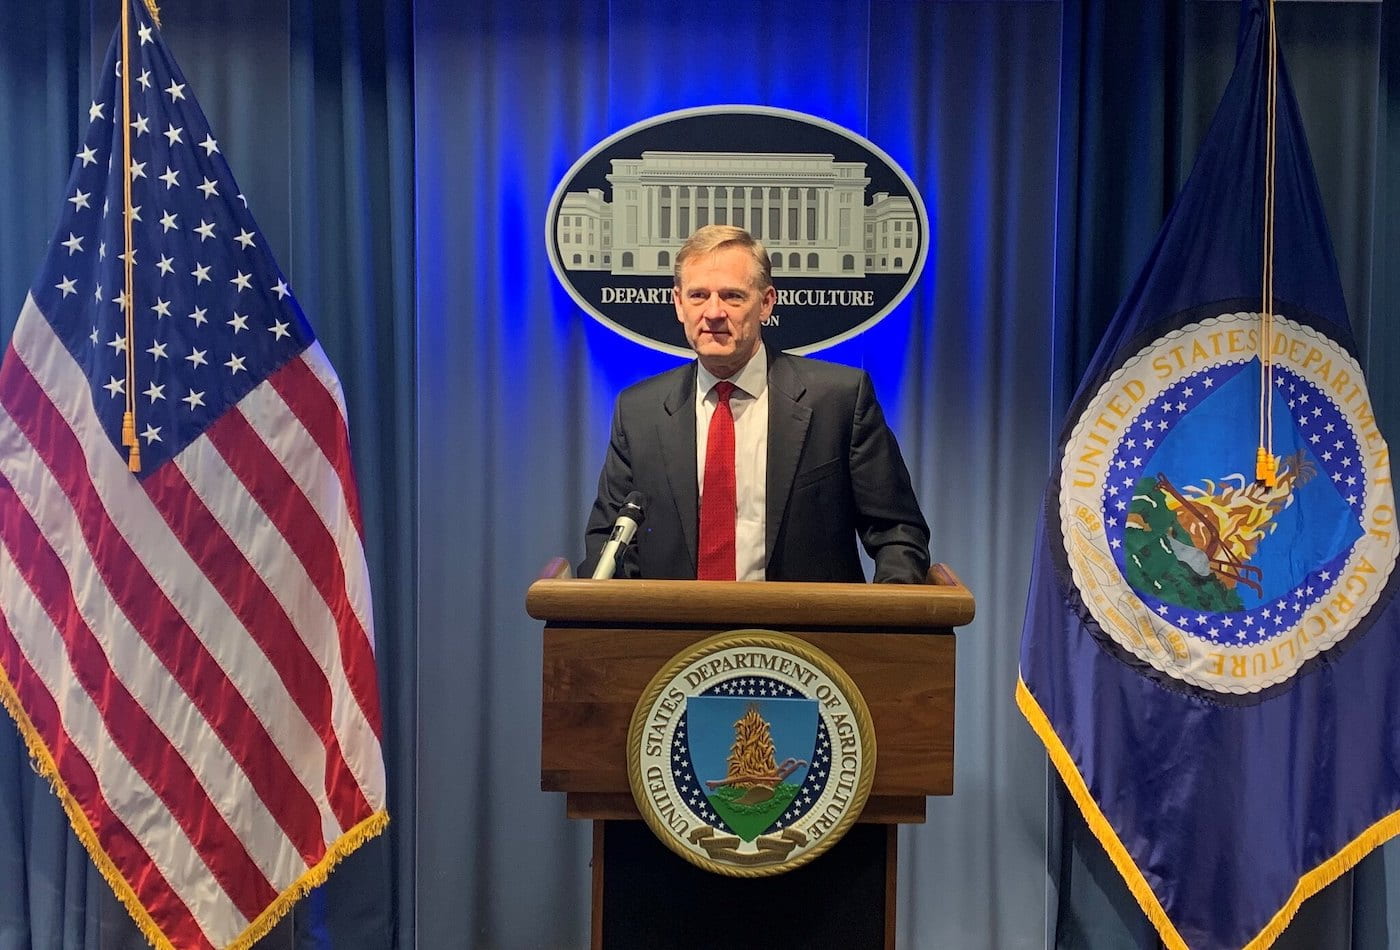 AG ECON AWARD — Bruce Ahrendsen, professor of agricultural economics and agribusiness for the University of Arkansas System, speaks before receiving an award from the USDA Economists Group in Washington, D.C. (Photo courtesy USDA Economists Group)